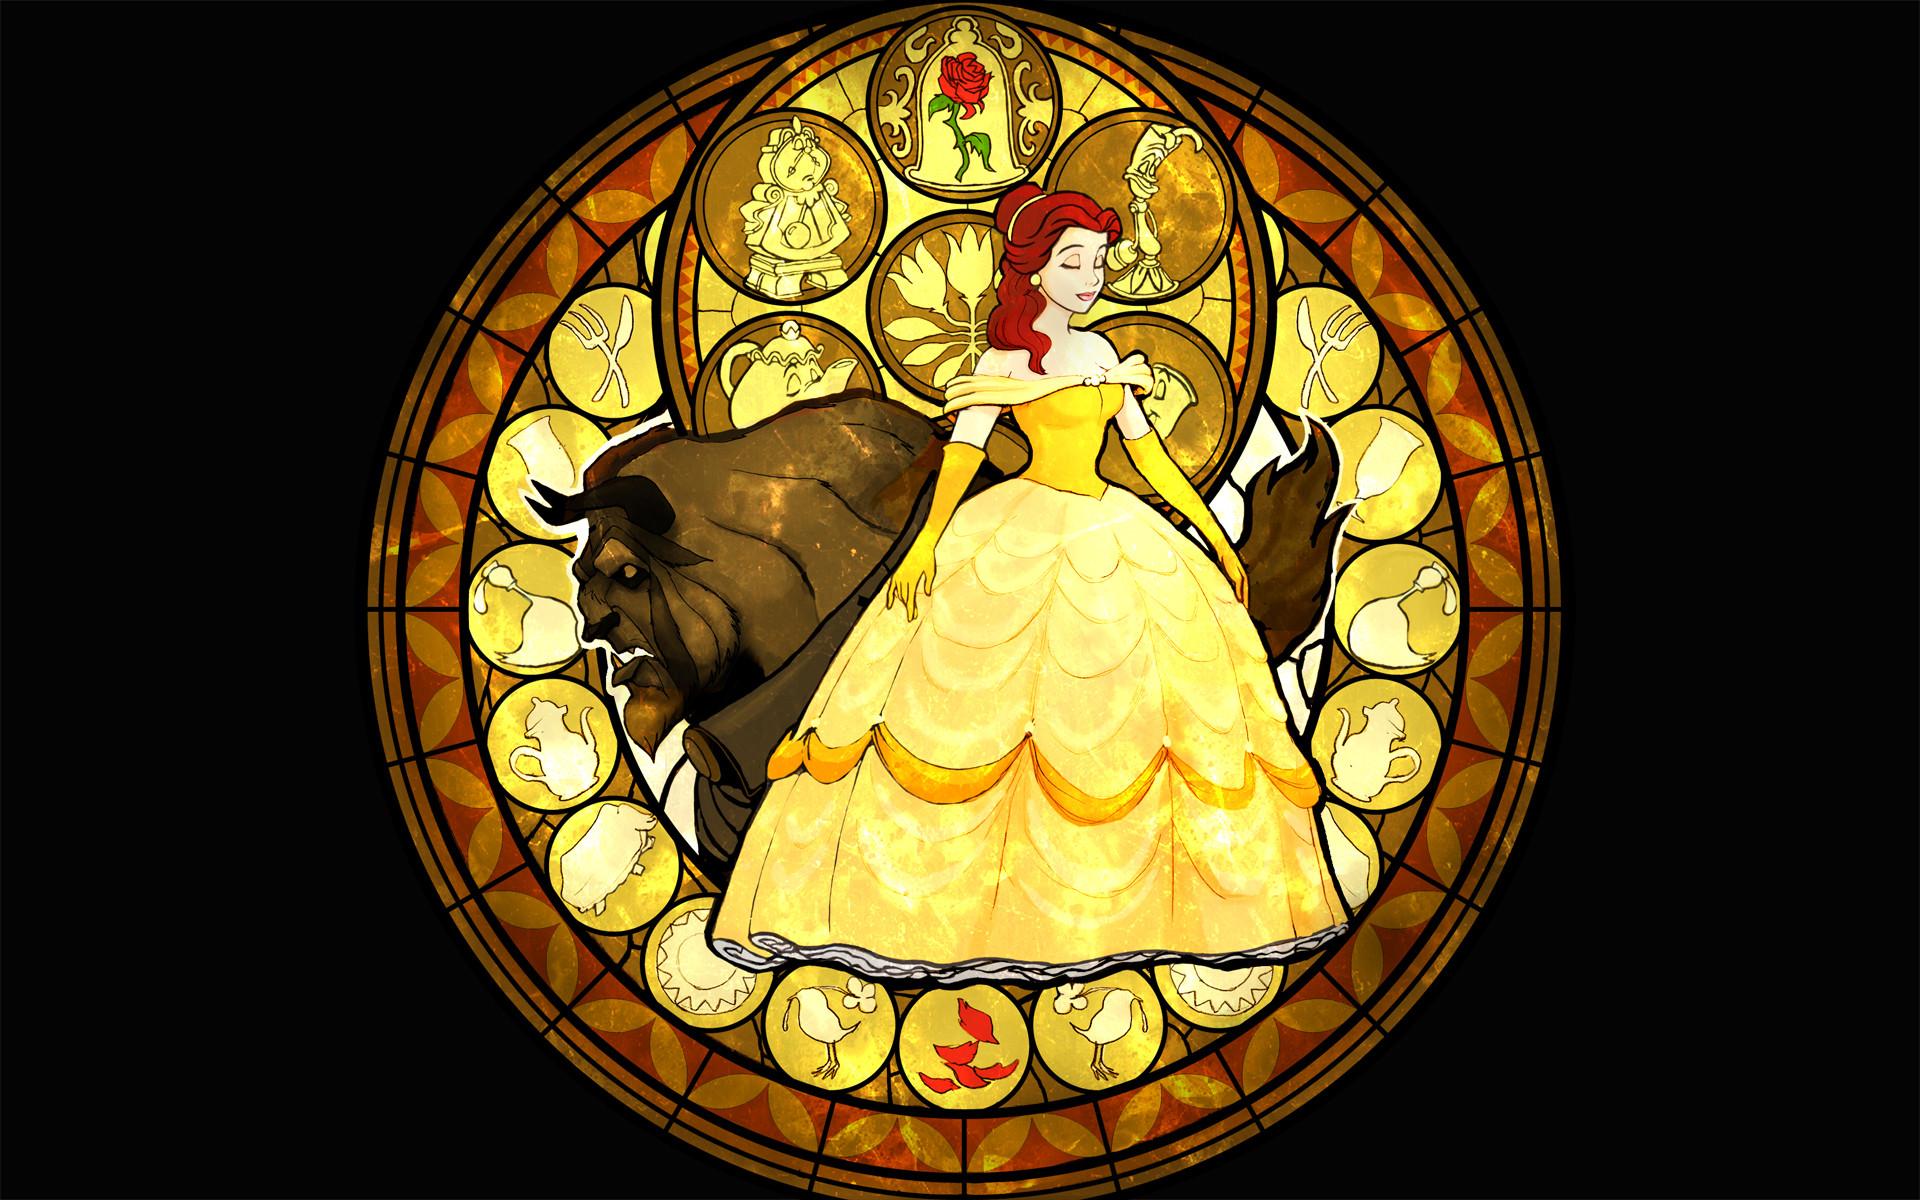 Beauty And The Beast Rose Wallpapers - Wallpaper Cave